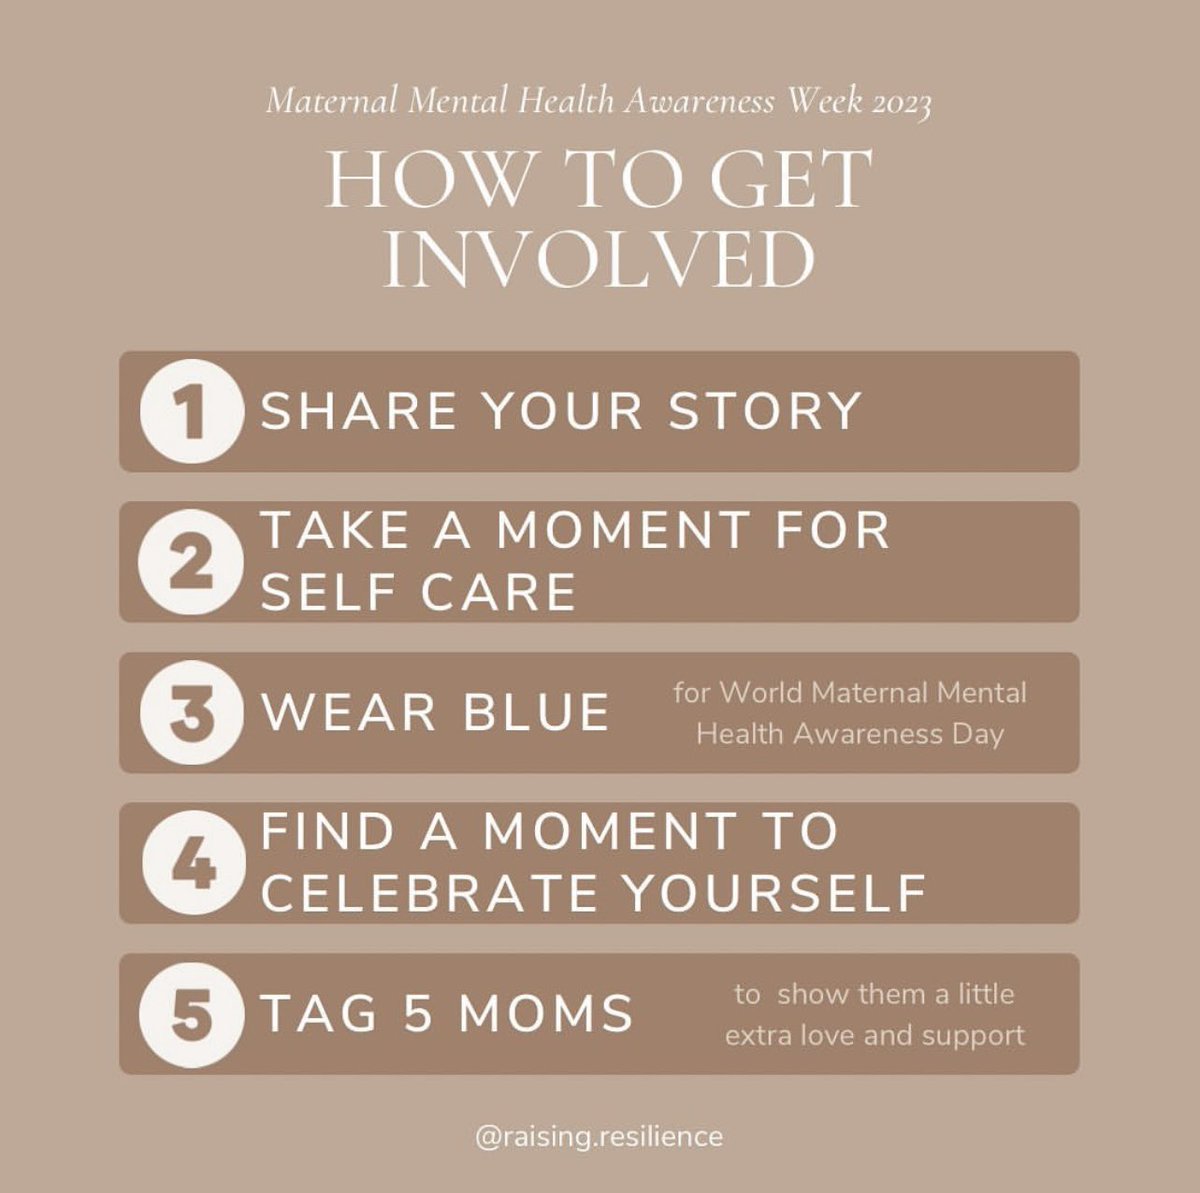 May 1-5 is Maternal Mental Health Awareness Week, and we are joining @thebluedotprj and @PostpartumHelp in spreading awareness with five days of how to get involved. Follow our IG to get involved this week. instagram.com/raising.resili… #MMHW2023 #TherapistTwitter #TherapistsConnect